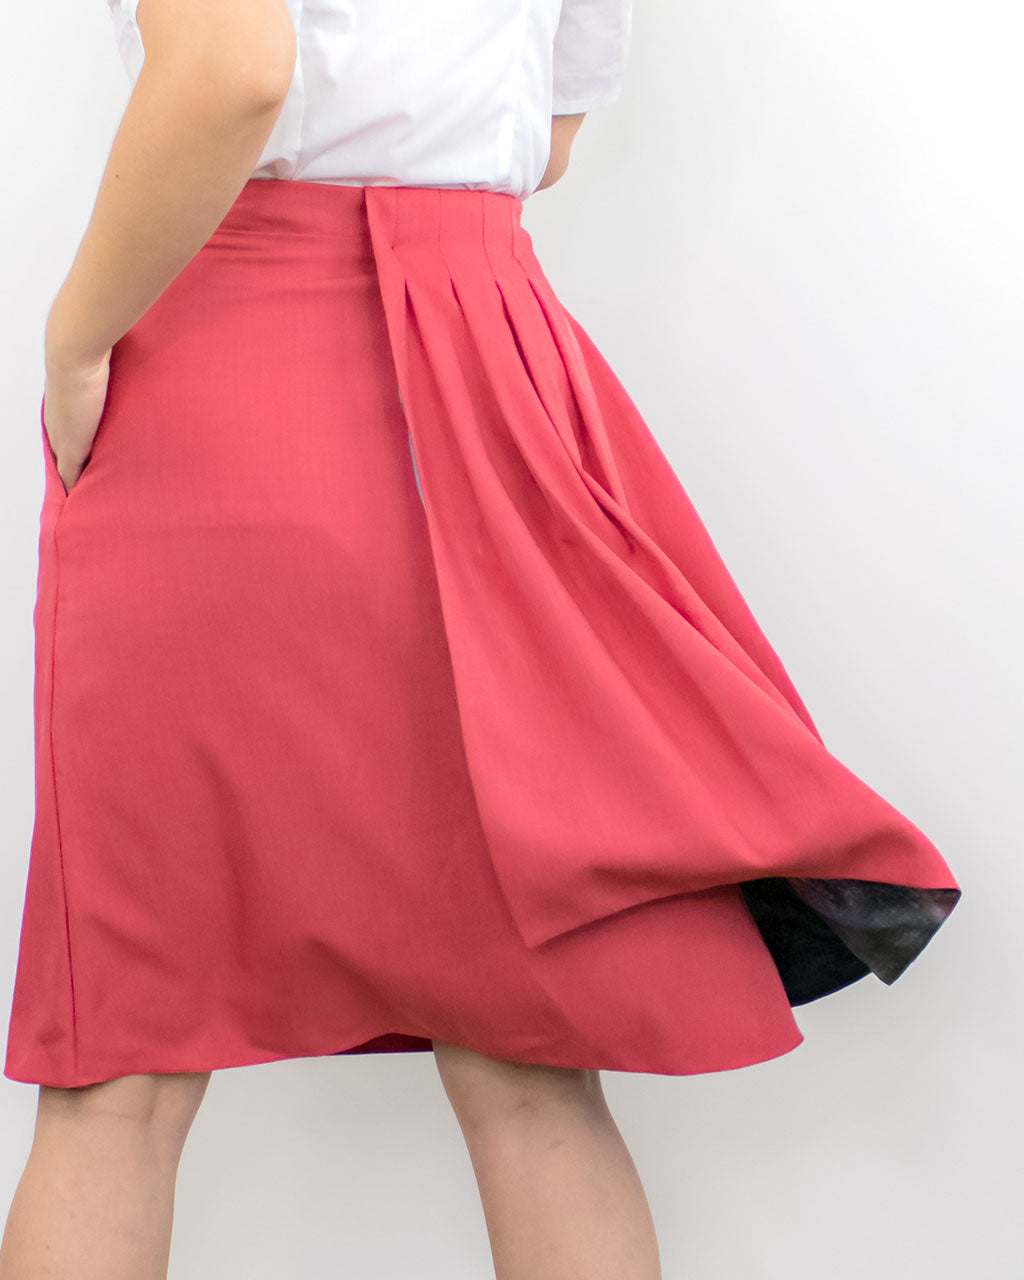 Ethical formal straight elegant a-line smart office skirt with pleats by ADKN made with sustainable recycled plastic bottles